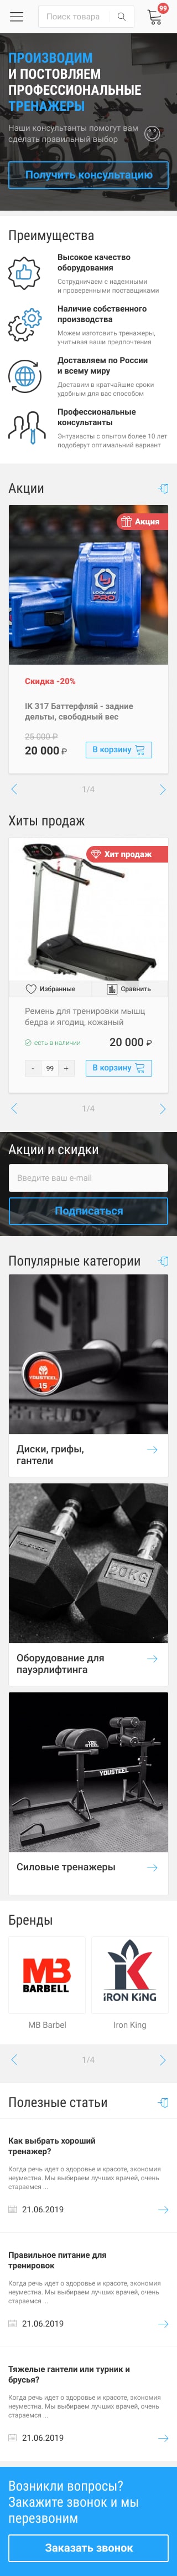 mobile version of home page for gym devices designed by Dima Radushev